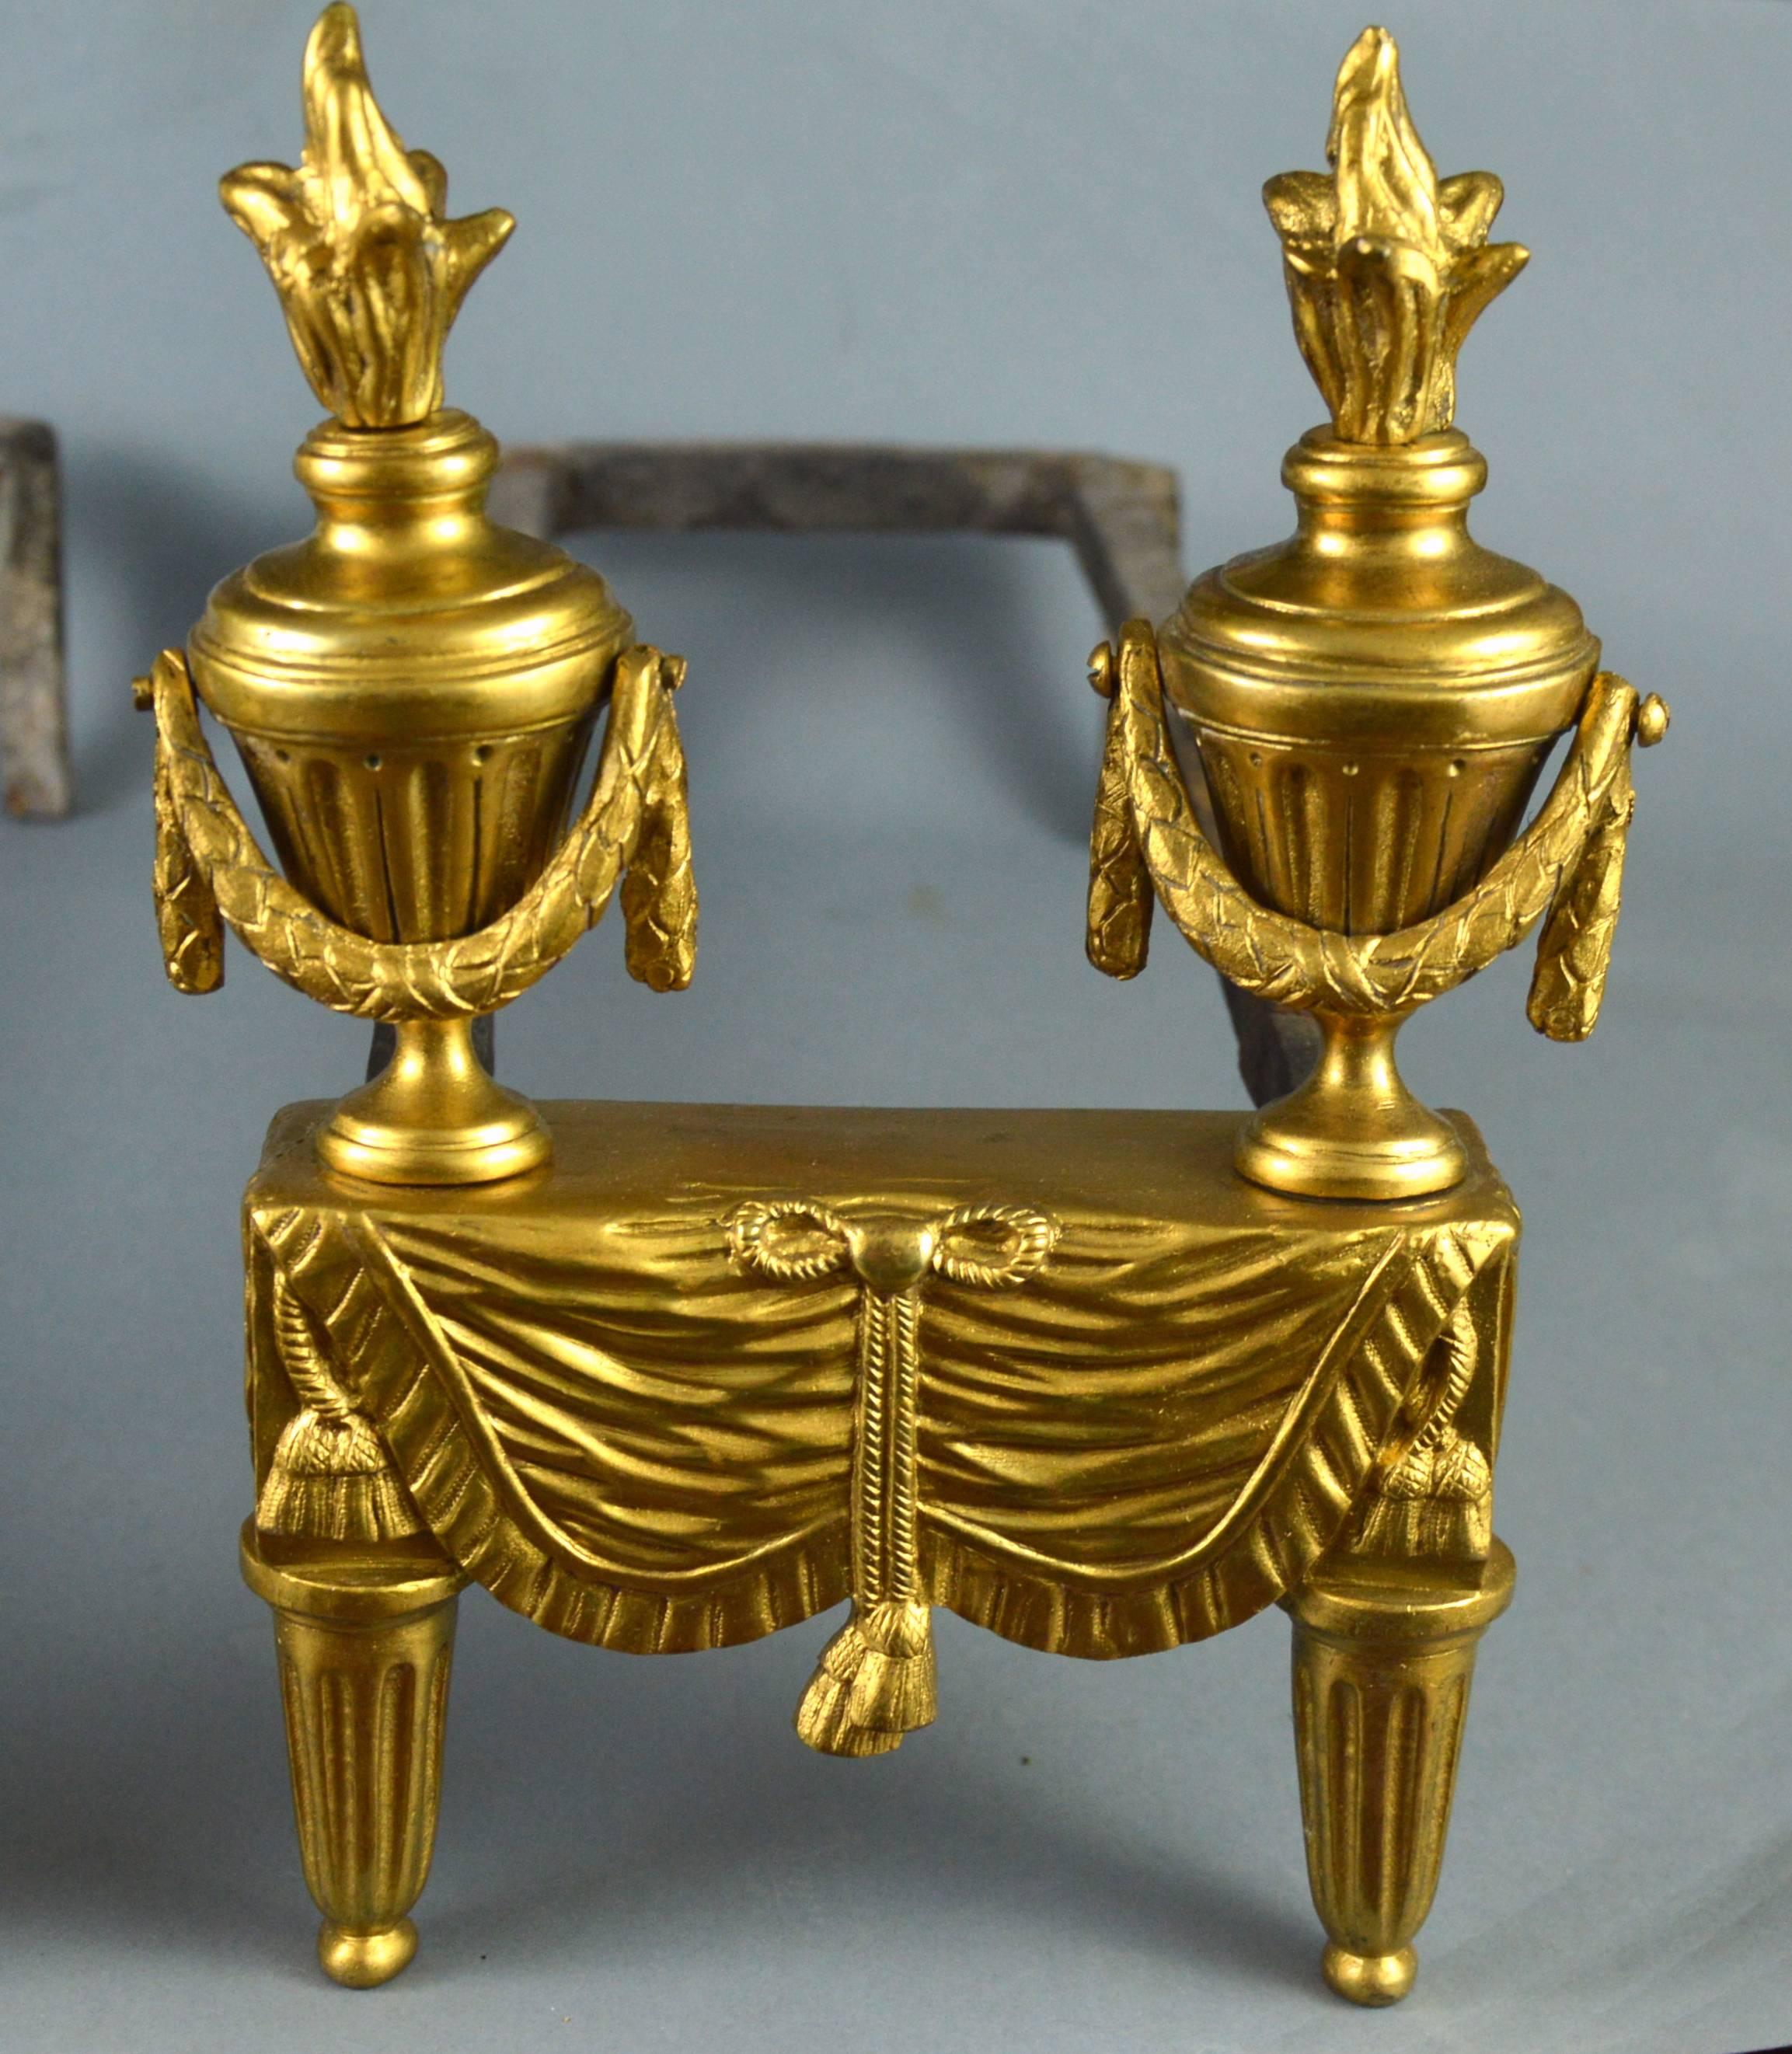 Louis XIV Pair of Antique French Gilt Bronze Andirons in a Style of Louis XVI 19th Century